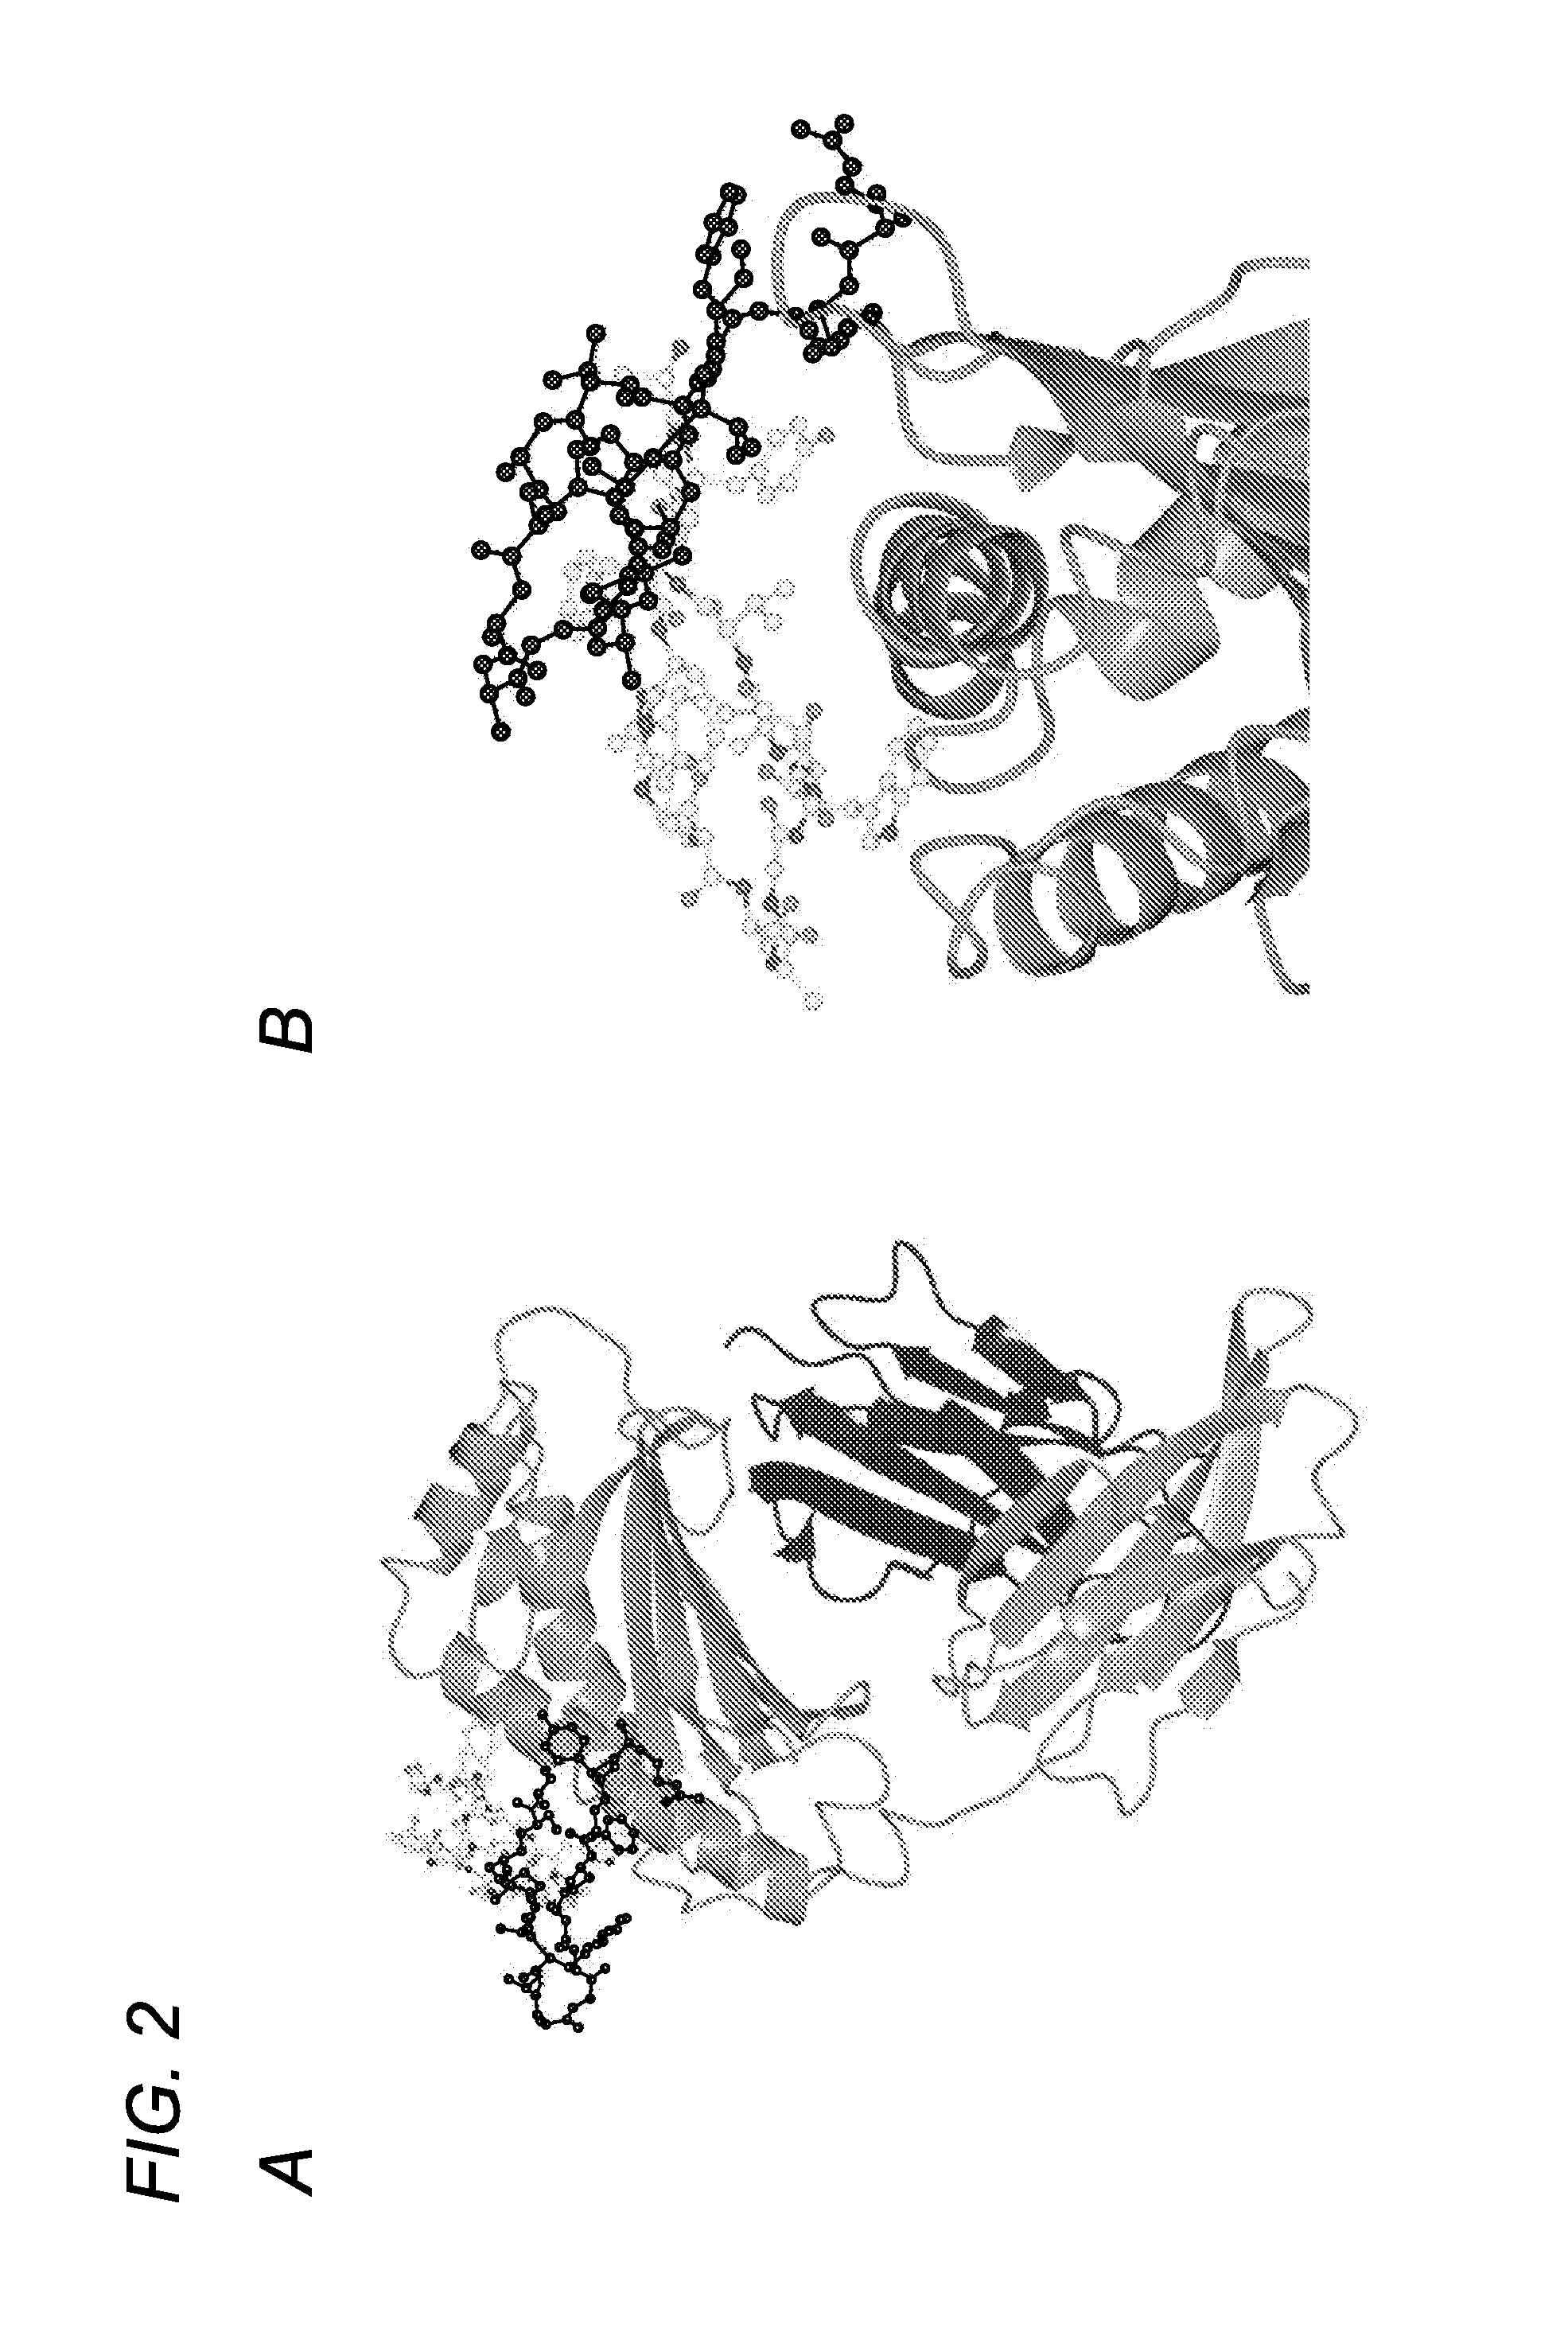 FC RECEPTOR (FcRn) BINDING PEPTIDES AND USES THEREOF